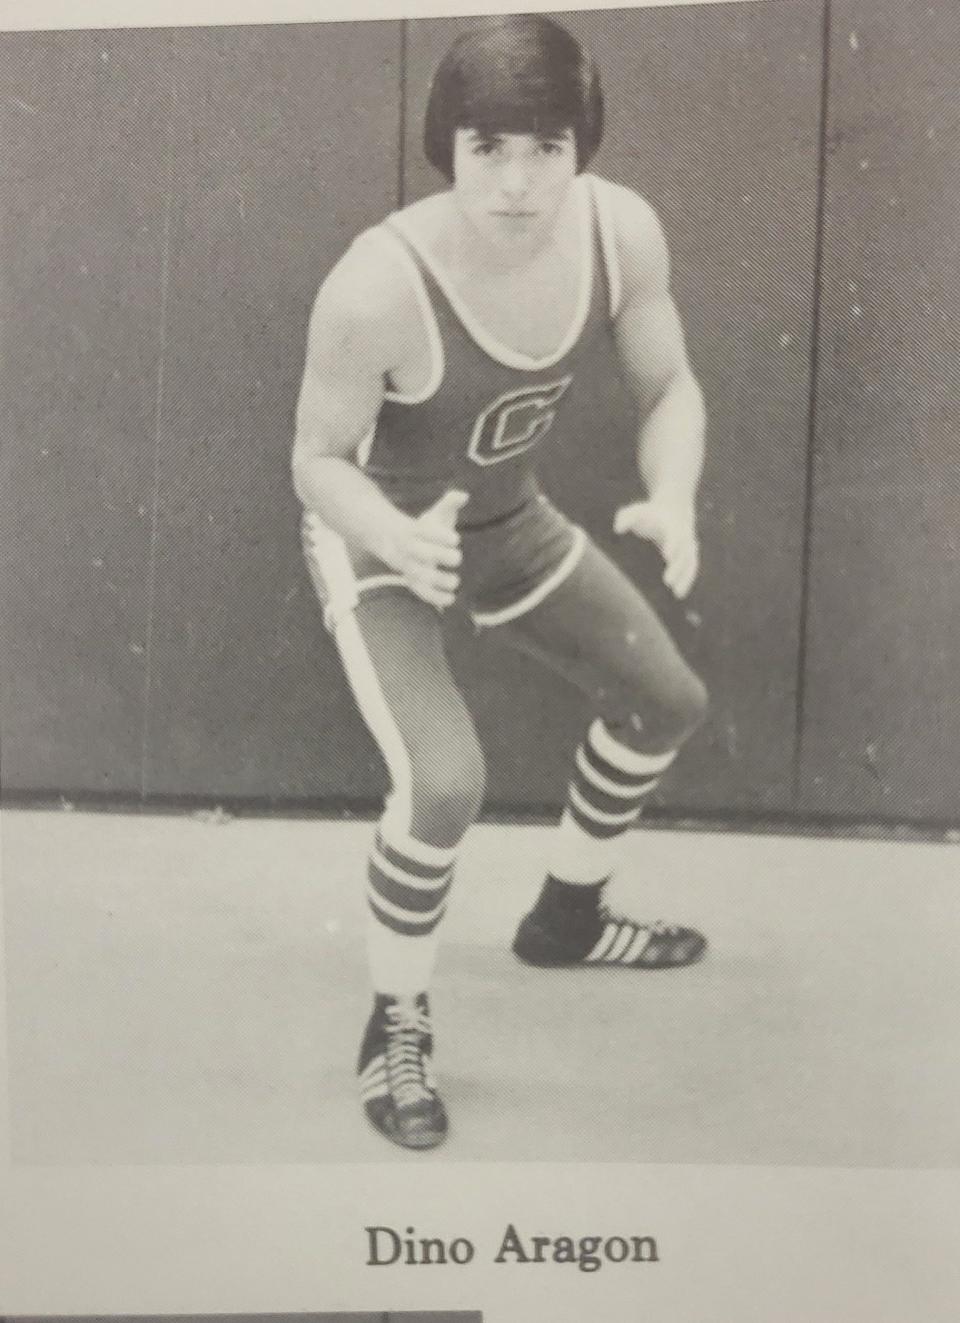 Dino Aragon was the first four-time-letter wrestler at Pueblo Central High School. He was voted 'Mr. C' while attending Central as well.